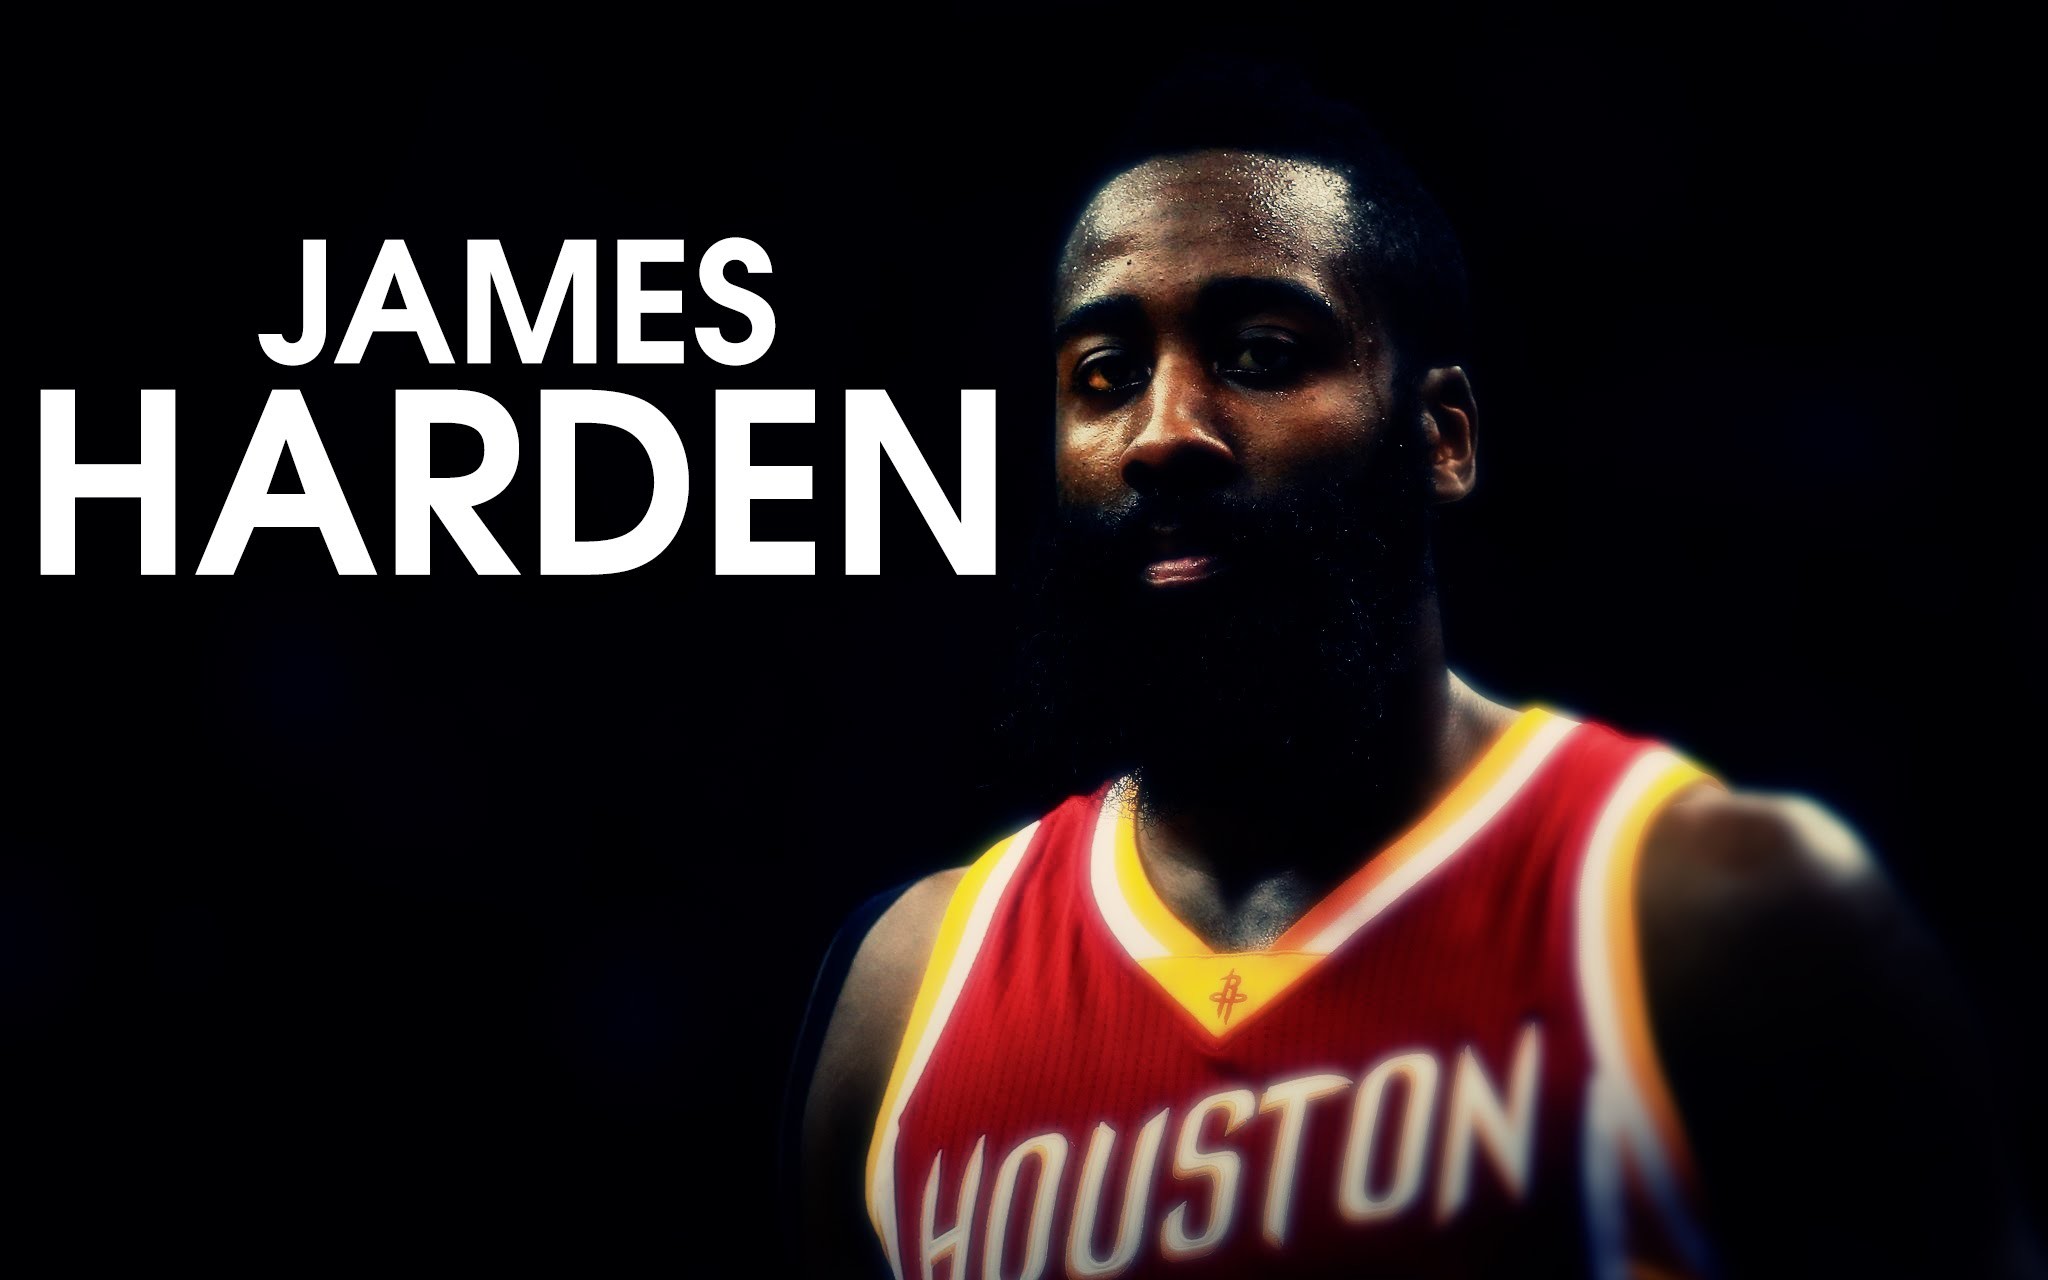 James Harden Wallpapers High Resolution and Quality Download